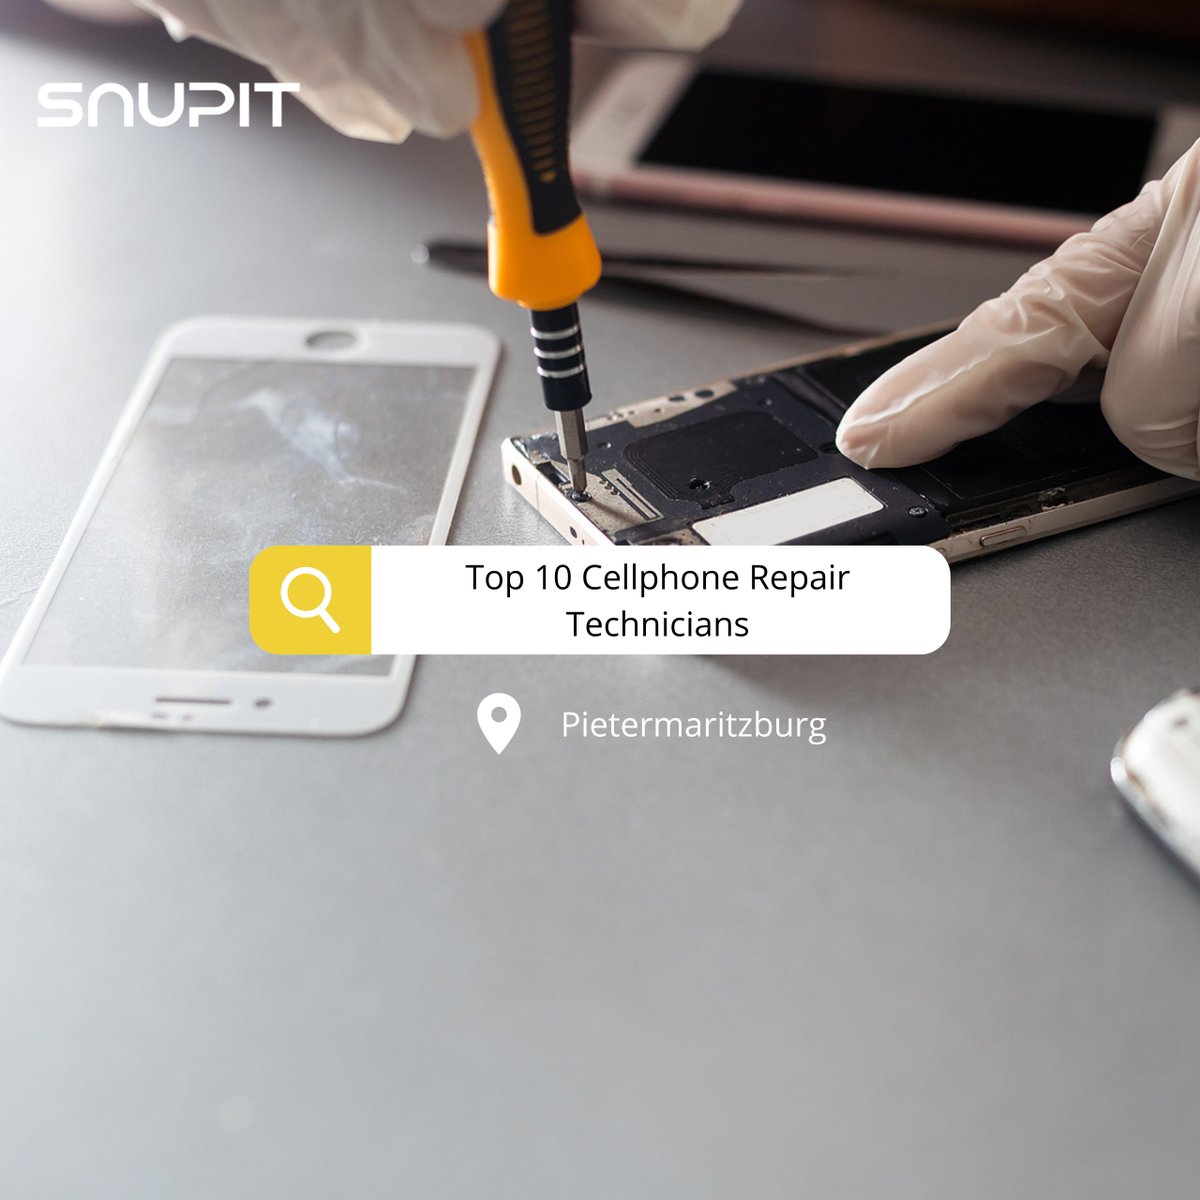 Cellphone repair is more affordable than a new phone purchase. While it may be nice to have a new cellphone, you can save a lot more money by repairing your phone. 
#cellphonerepairs 

Get quotes from reliable Cellphone Repair Technicians on Snupit.
snupit.co.za/post-quote-req…